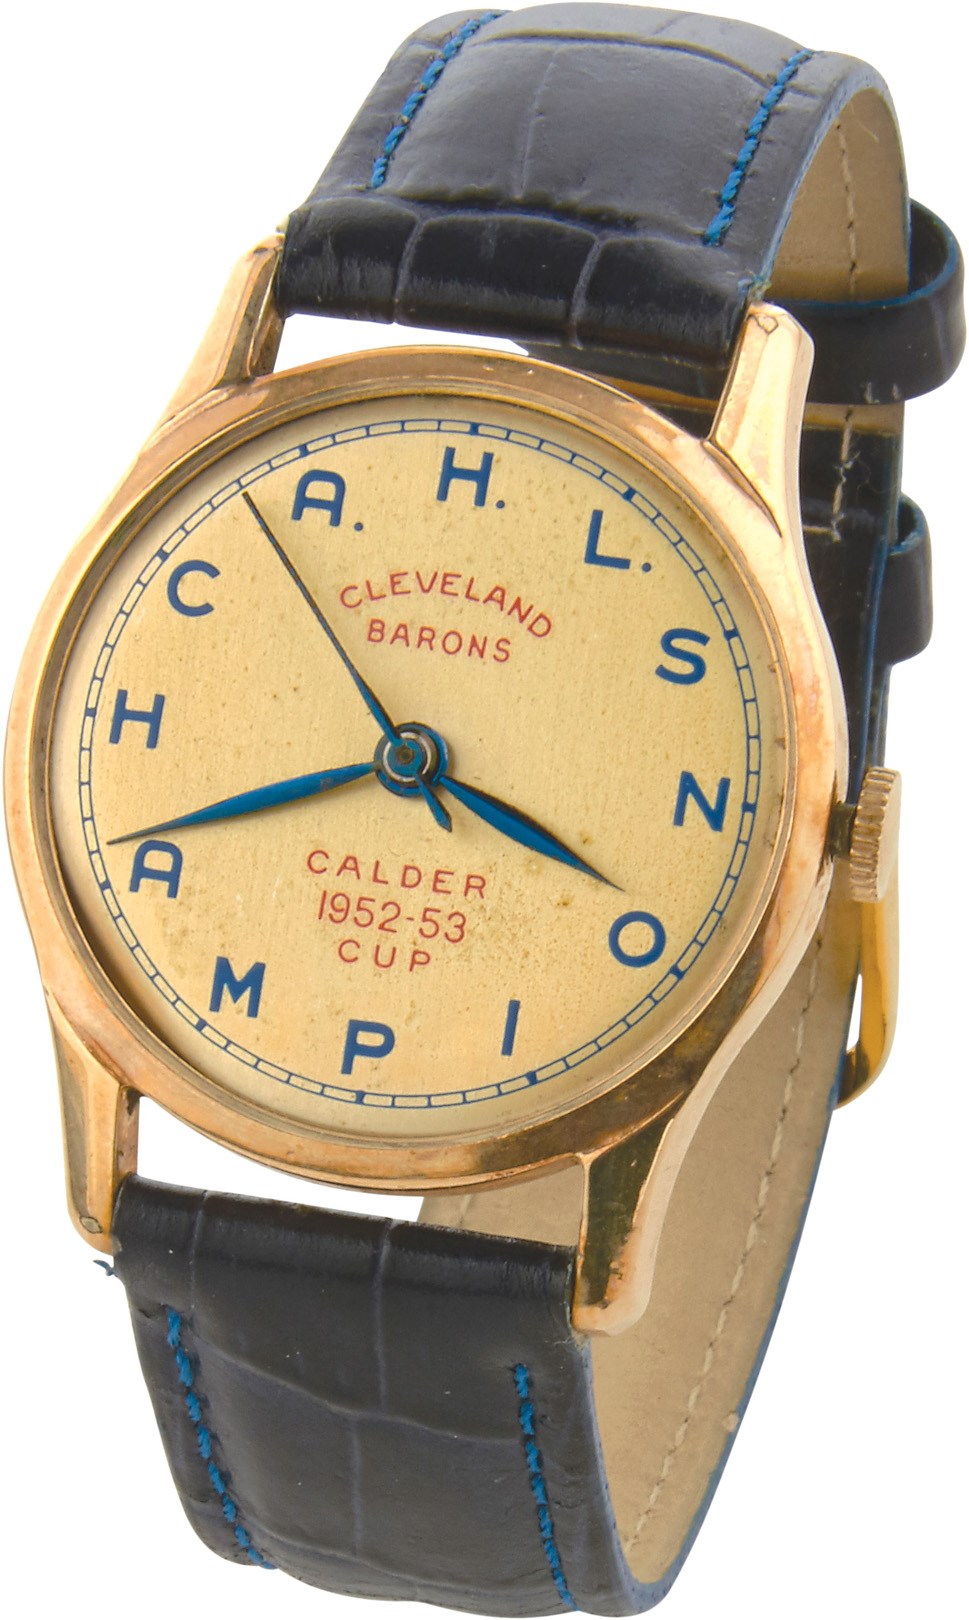 1952-53 Cleveland Barons Calder Cup Championship Watch